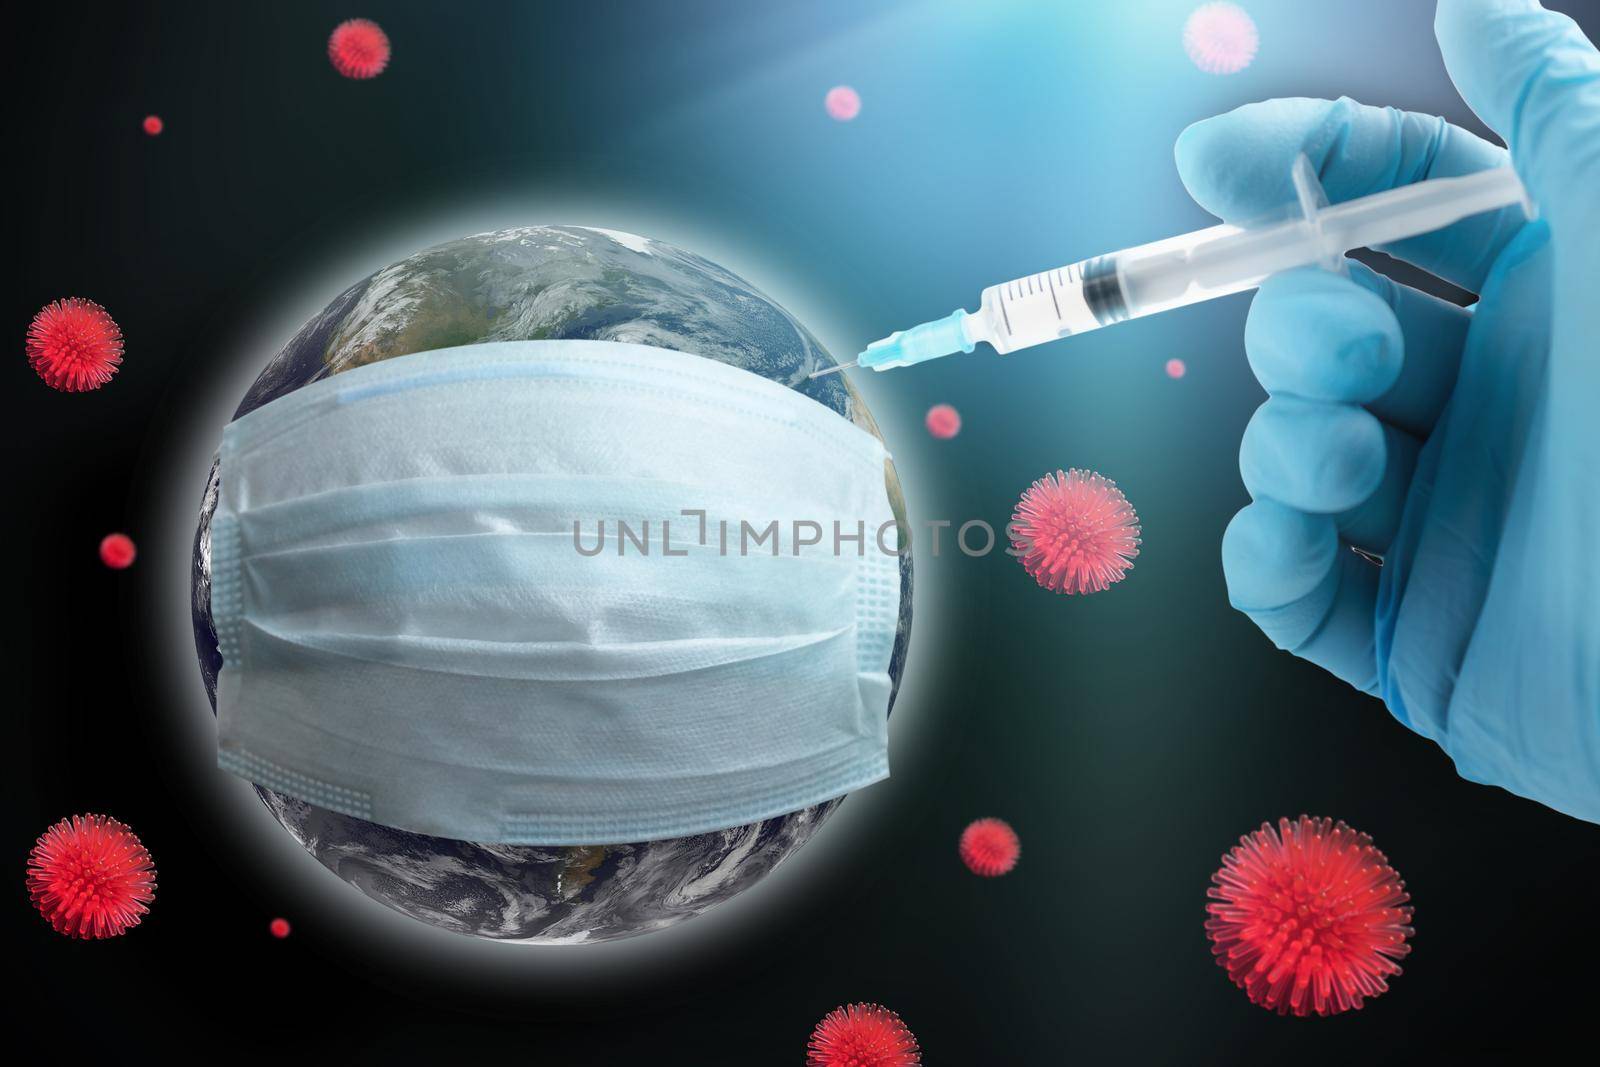 Coronavirus global vaccination concept. Earth in a protective mask, hand with a syringe makes an injection. Earth image courtesy of NASA.